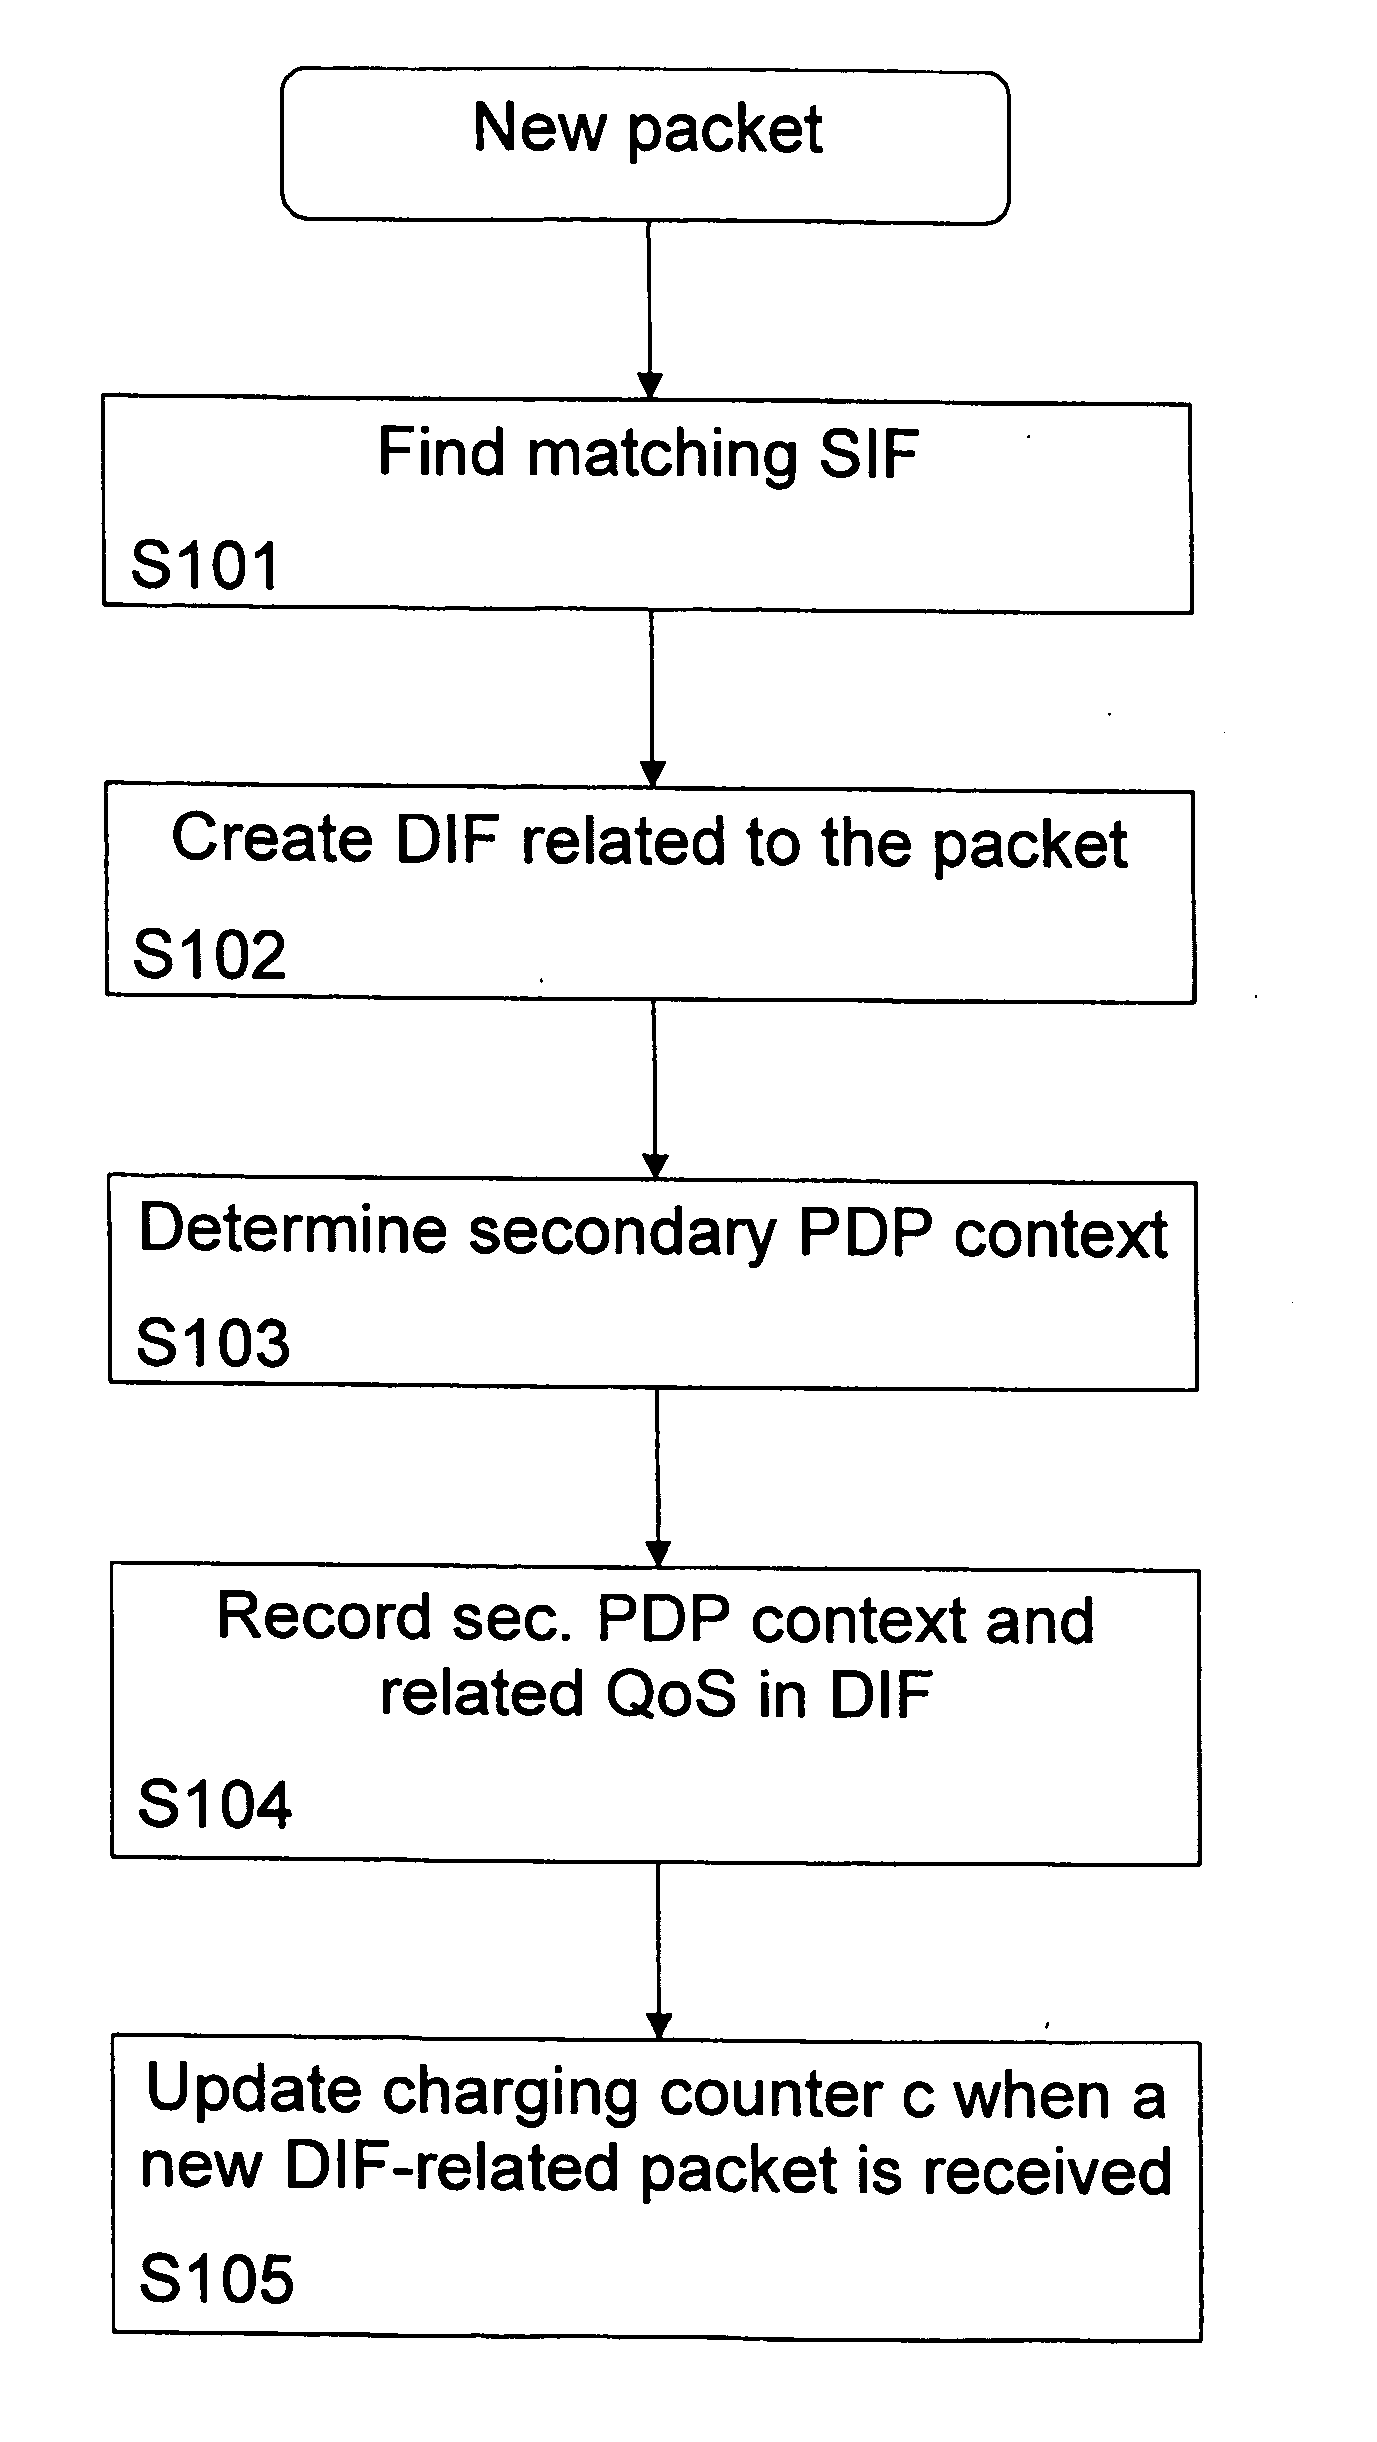 Context-based processing of data flows